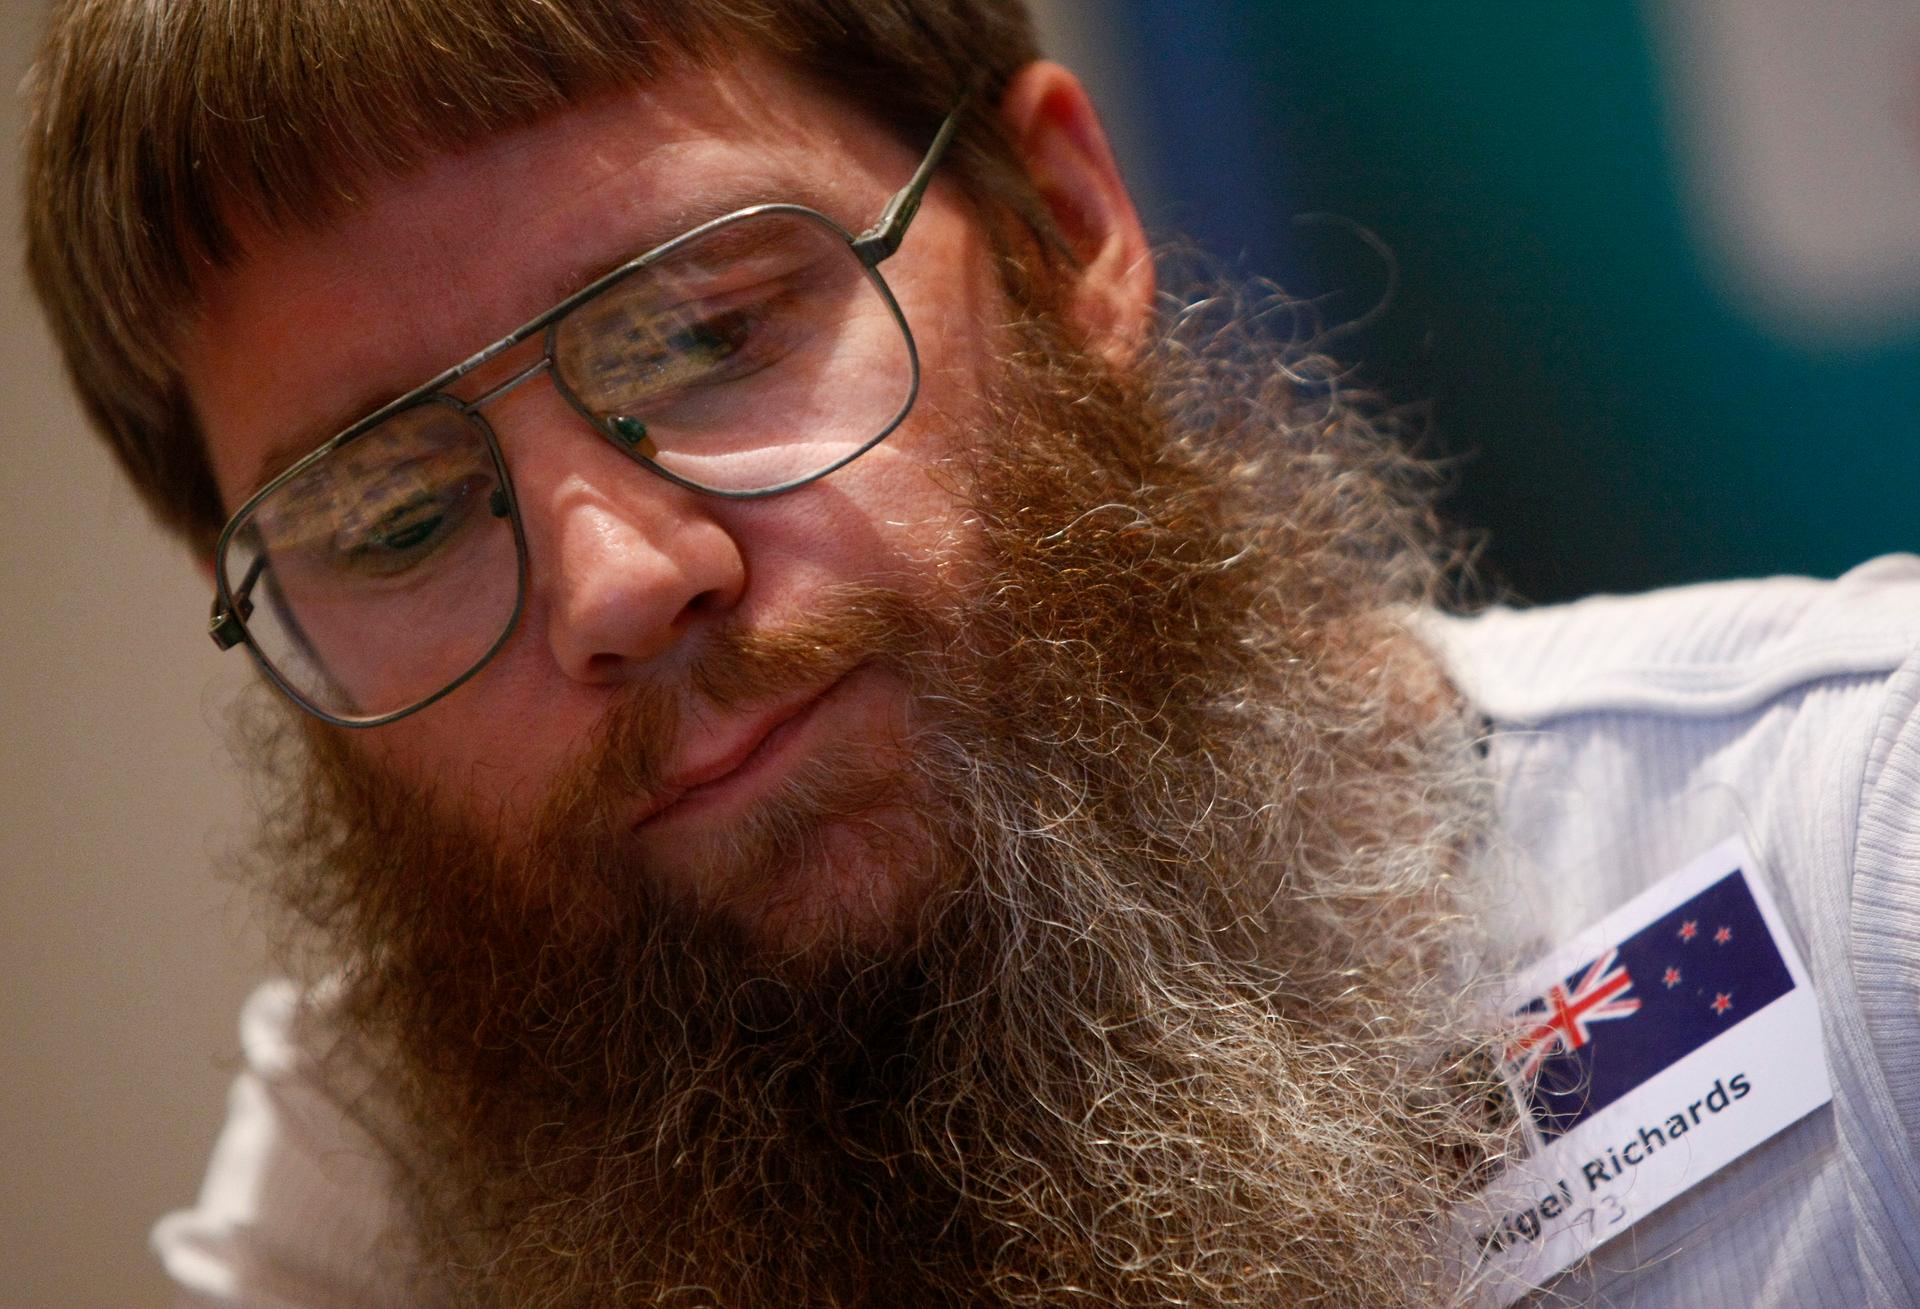 Nigel Richards of New Zealand plays scrabble at the 2011 World Scrabble Championship in Warsaw